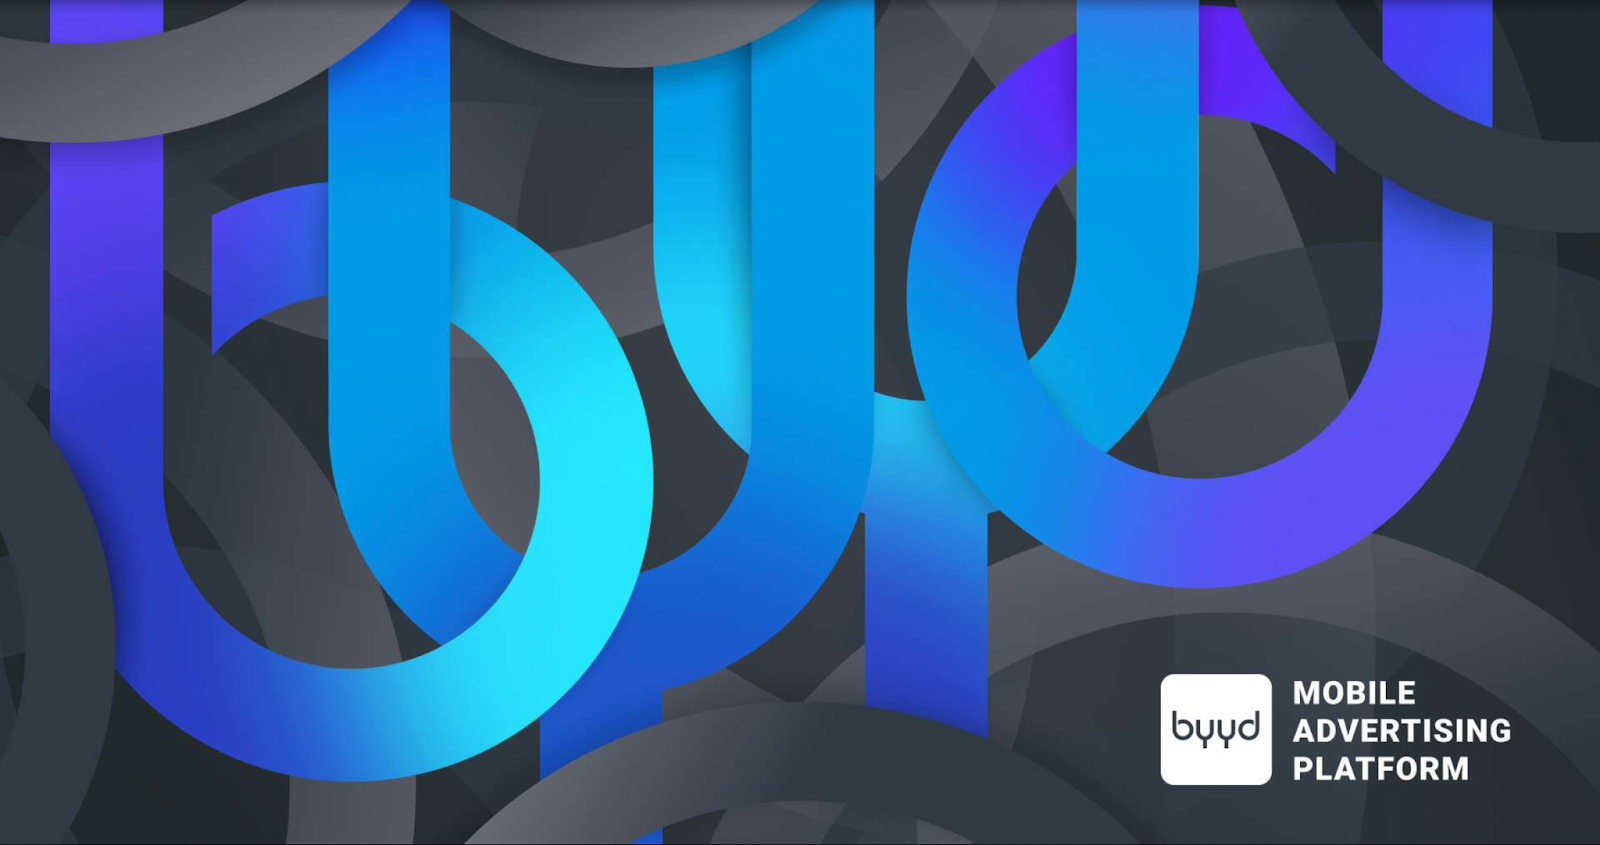 Byyd. BYYD лого. BYYD агентство. BYYD mobile logo. BYYD logo PNG.